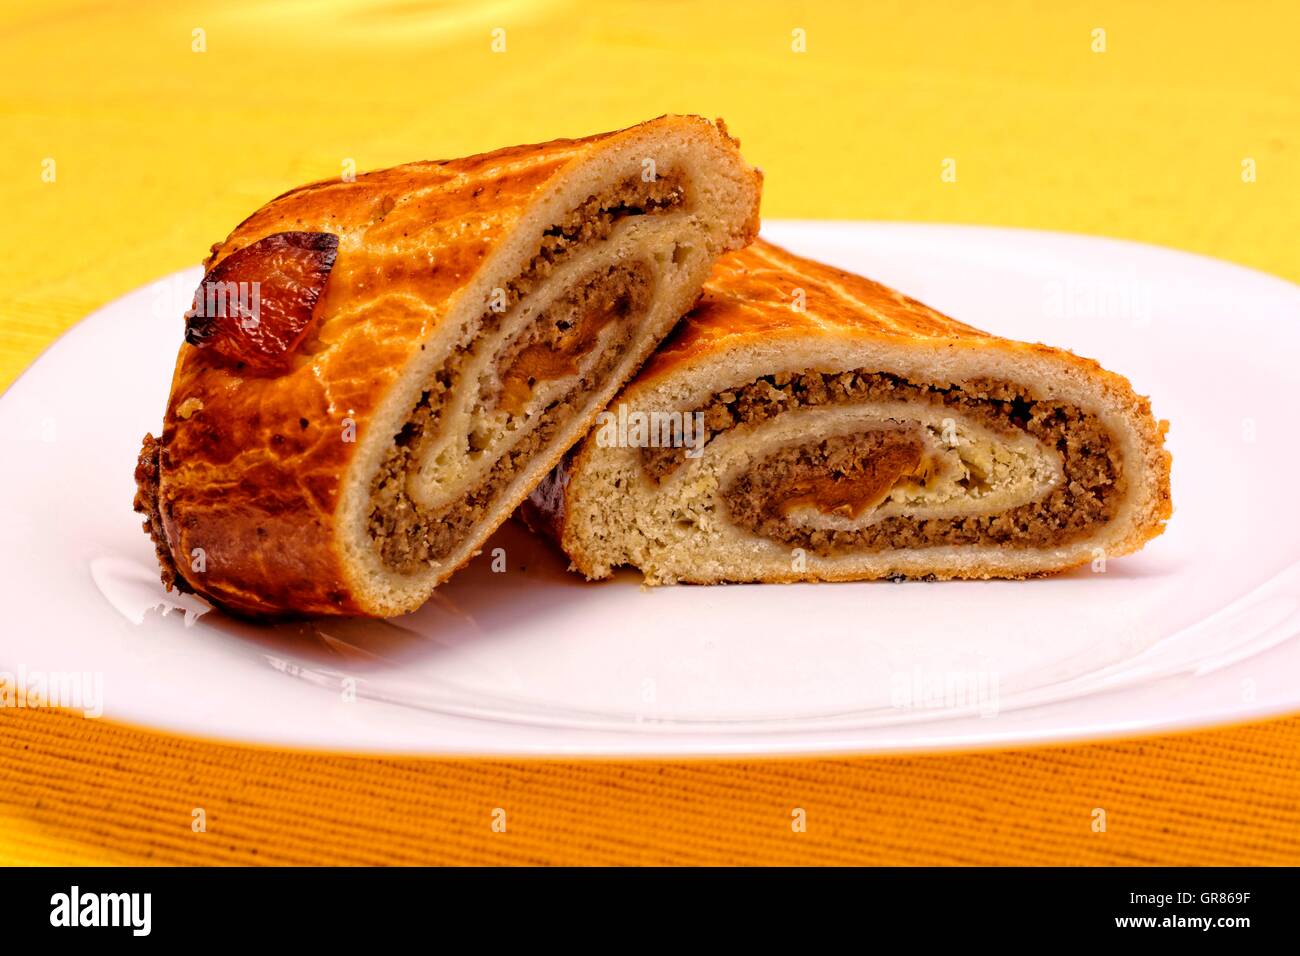 Walnut Or Poppy Seed Roll With Dried Apricots Beigli, An Old-Fashioned Hungarian Weihnachtsgebaeck Stock Photo